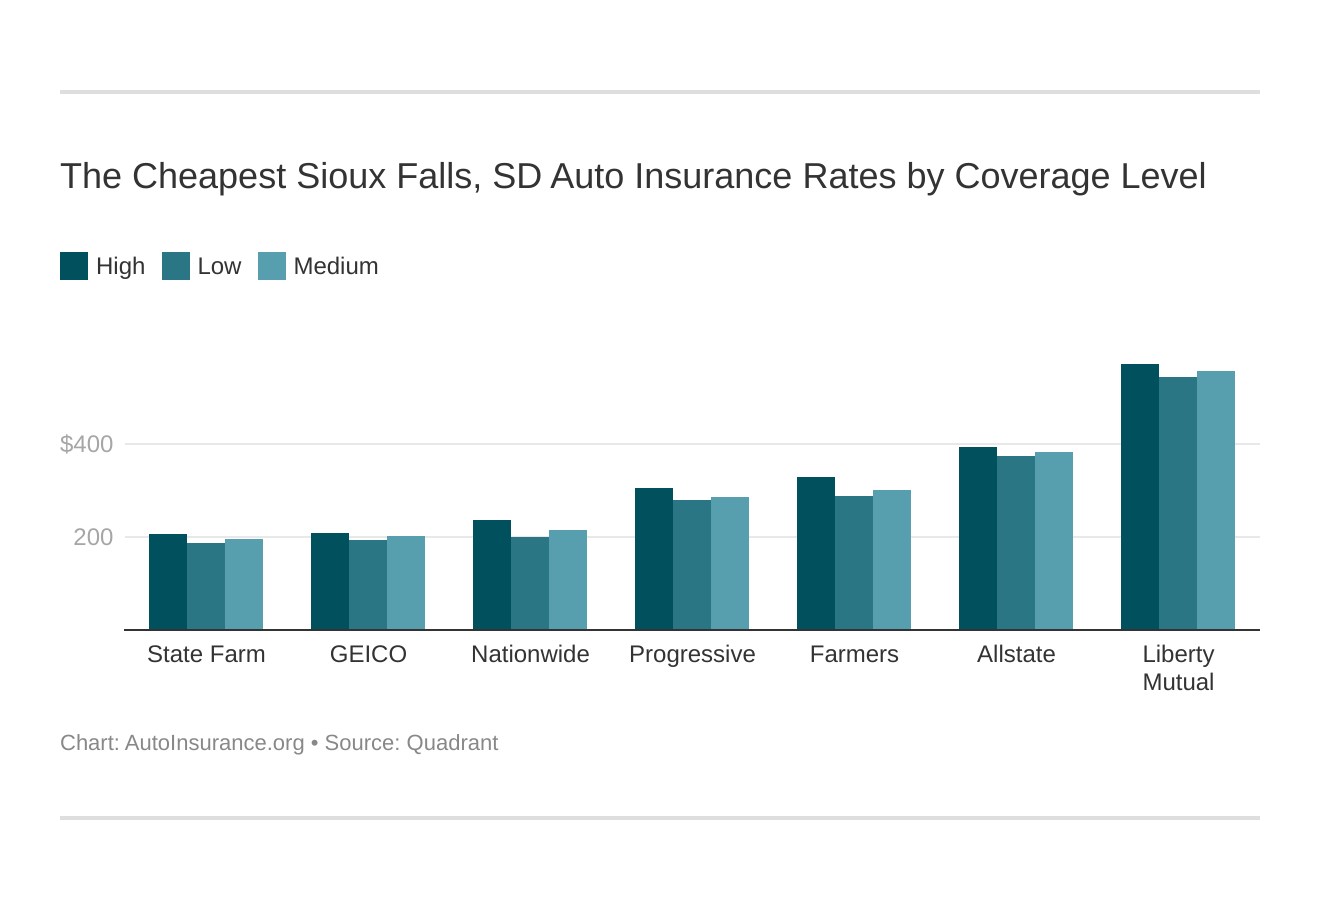 The Cheapest Sioux Falls, SD Auto Insurance Rates by Coverage Level